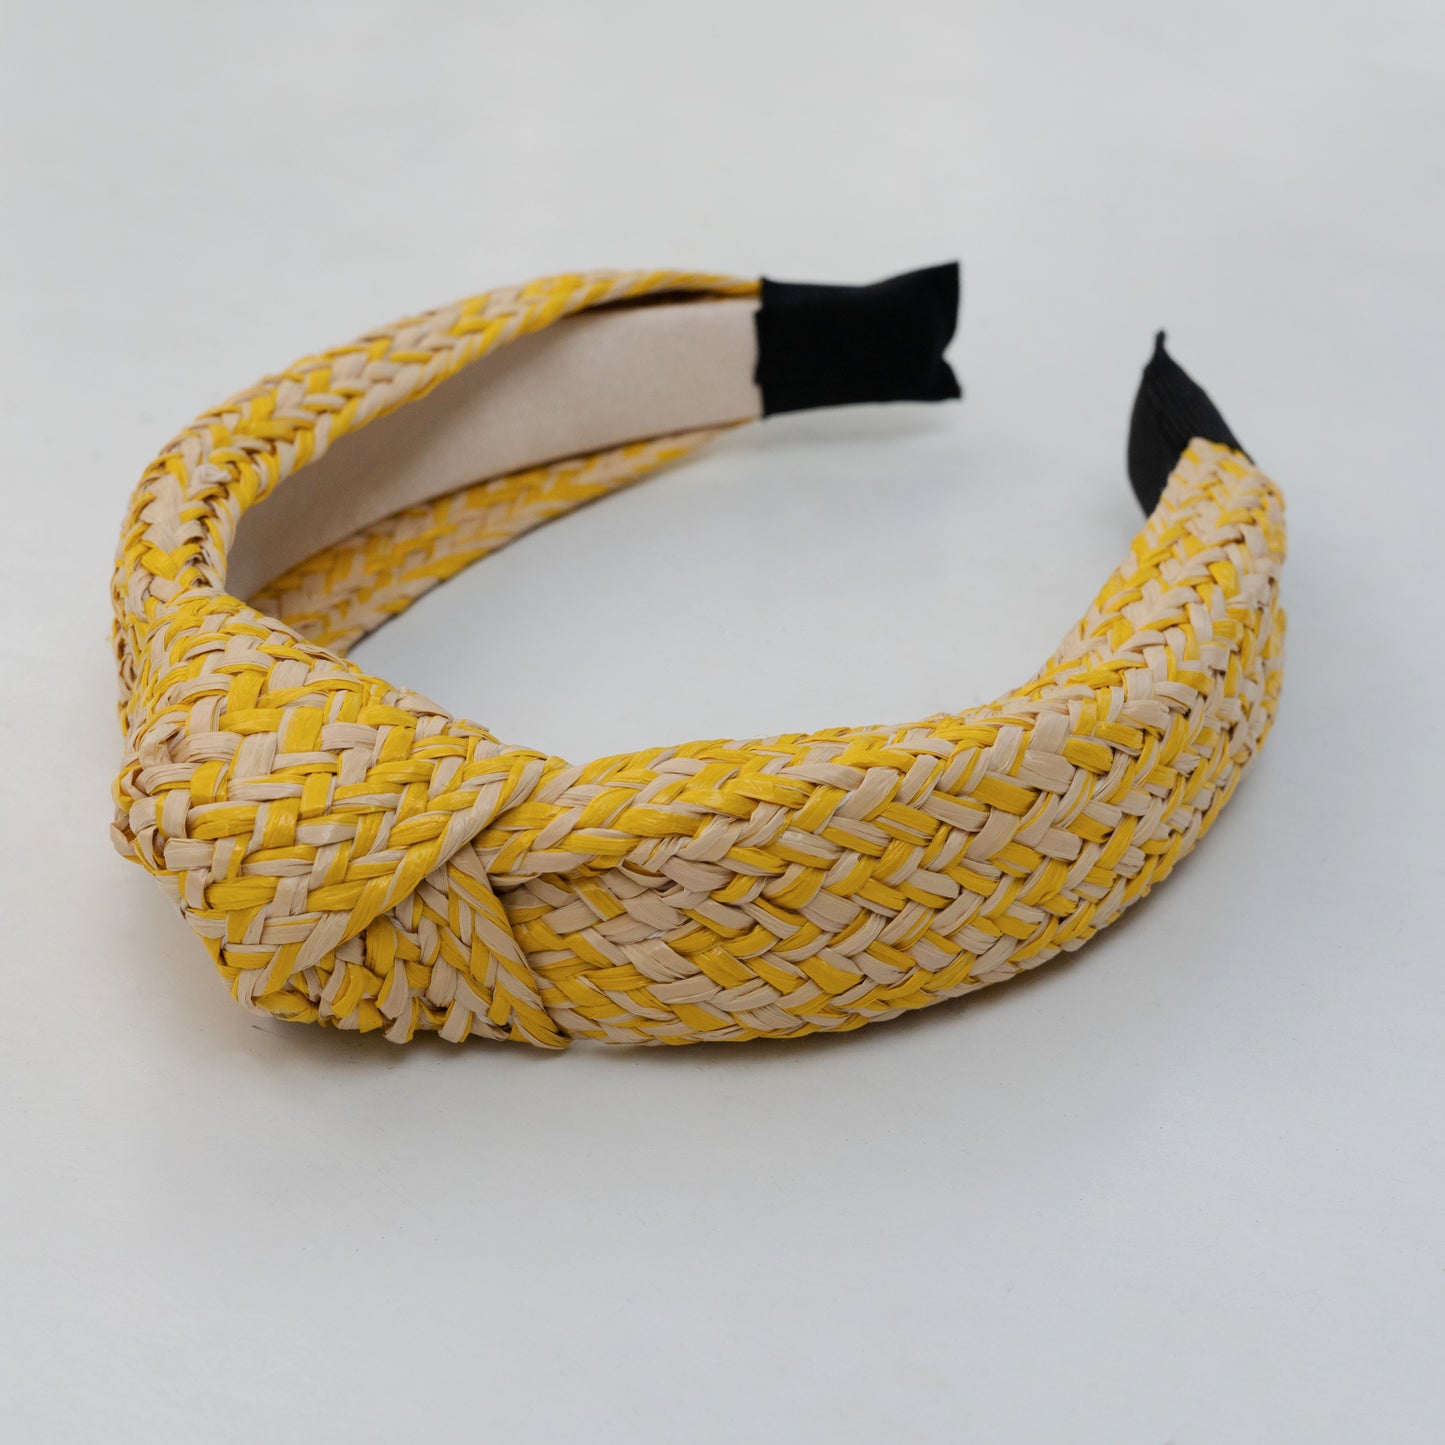 Two-Tone Knotted Rattan Headband